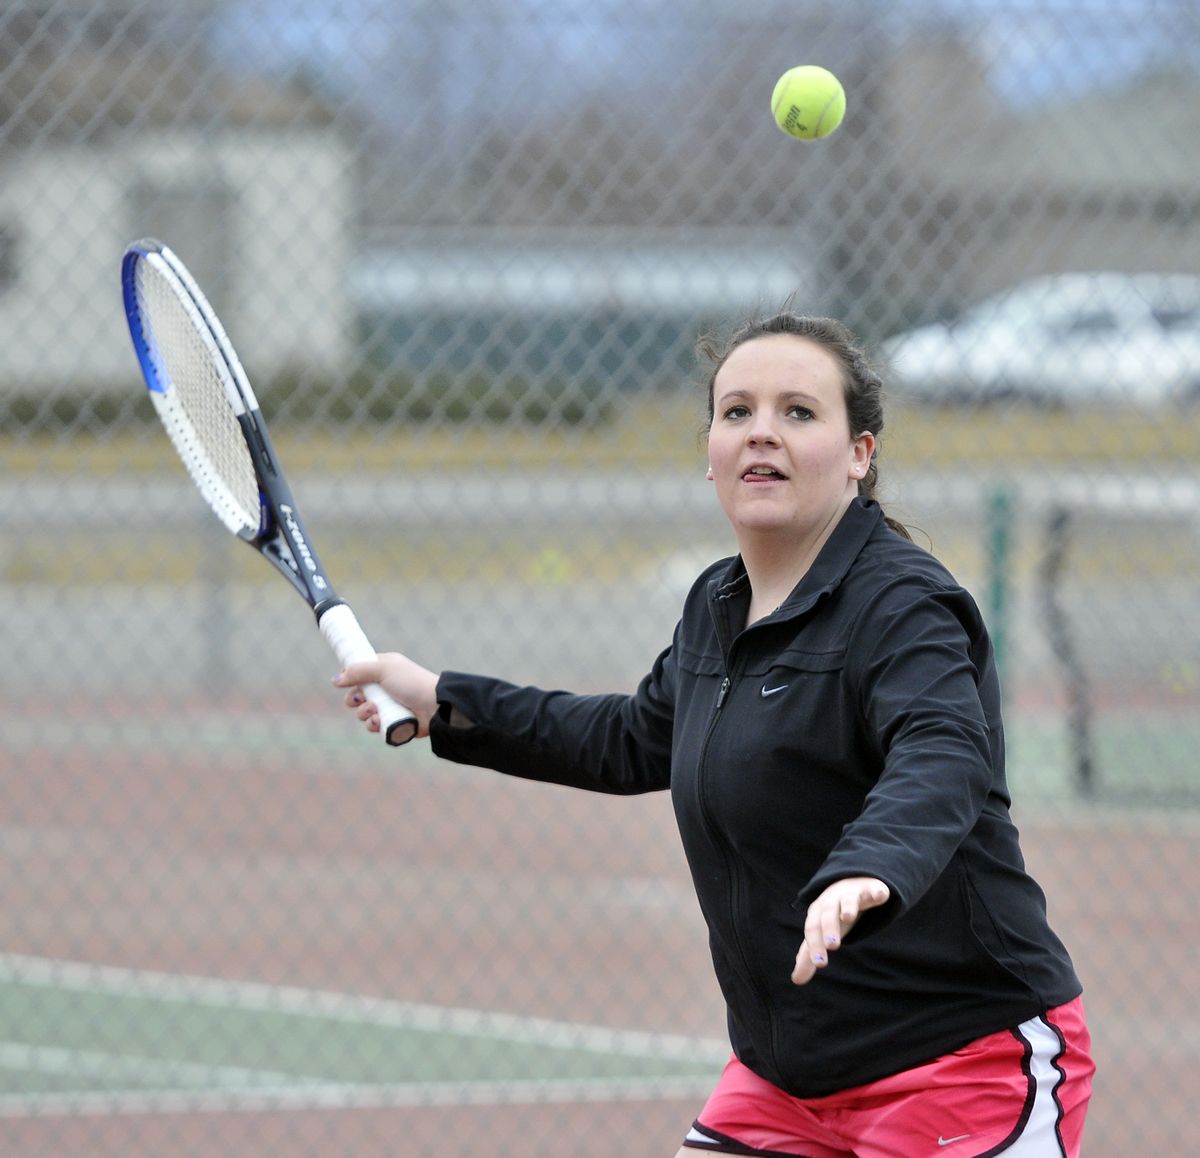 Callie Hanson, a senior at East Valley High School, practices Wednesday at the school for the spring tennis season. (Jesse Tinsley)